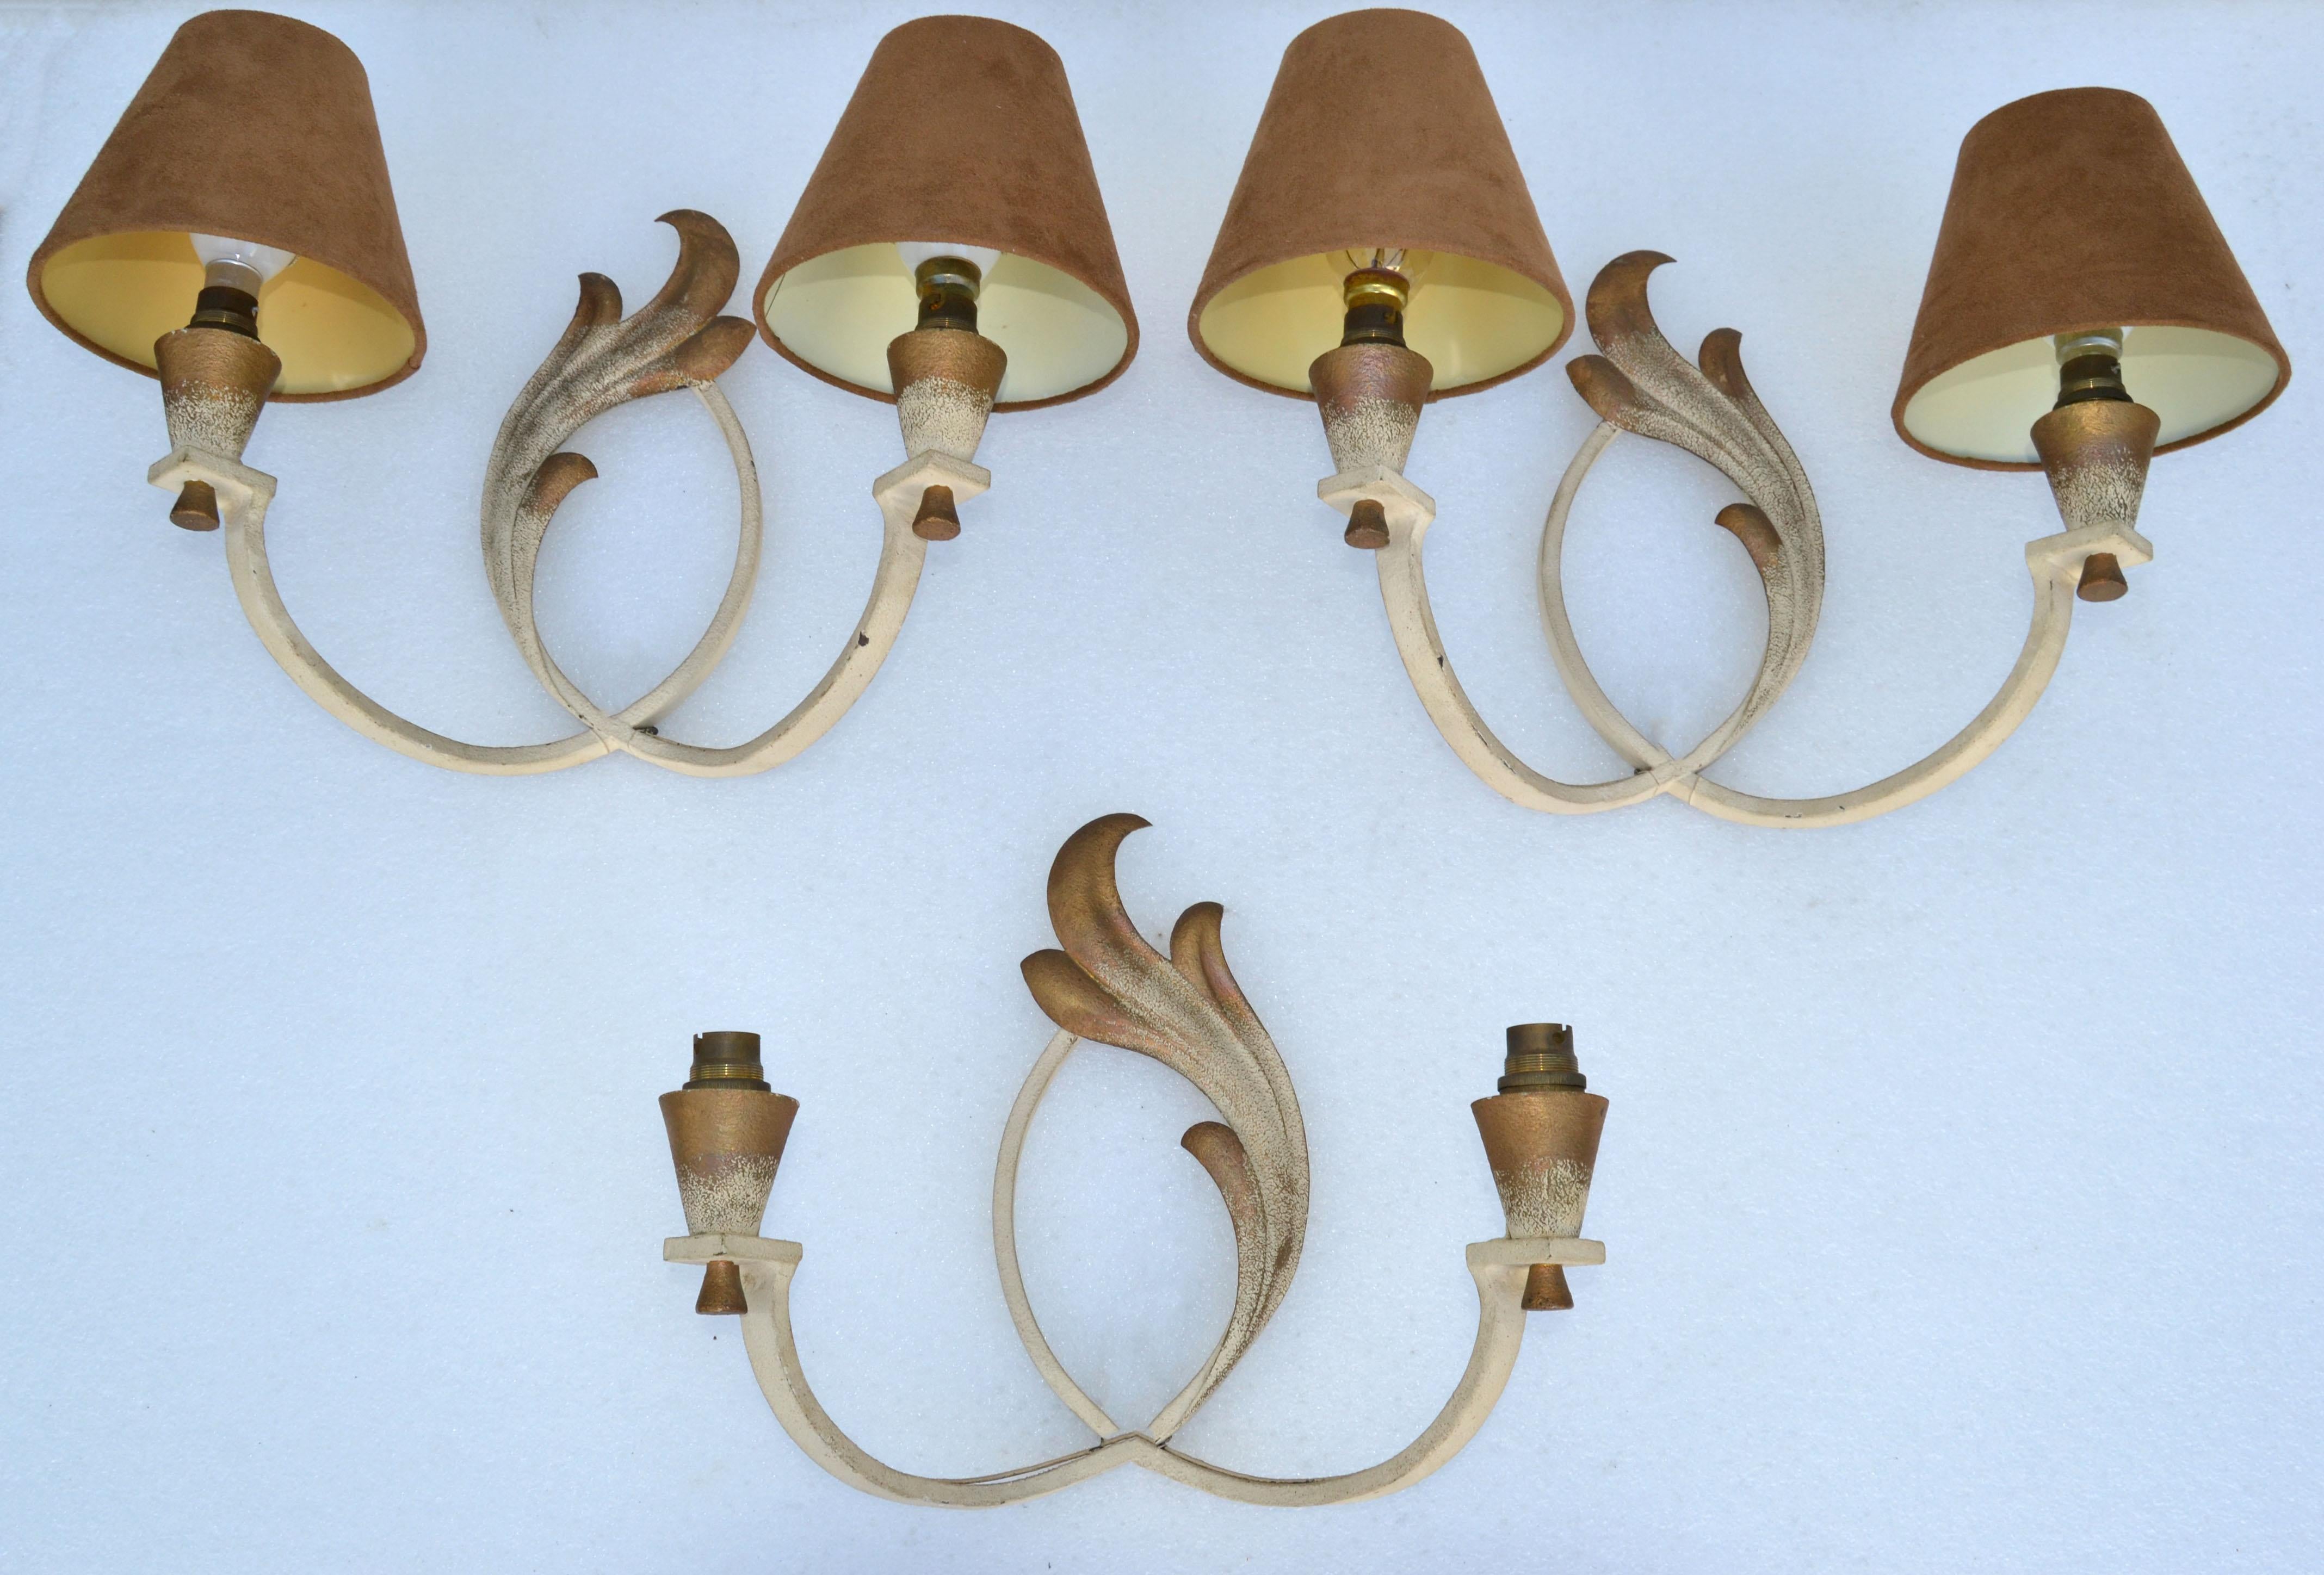 Cast French Wrought Iron Sconces & Shades, Wall Lights Art Deco 1950 For Sale